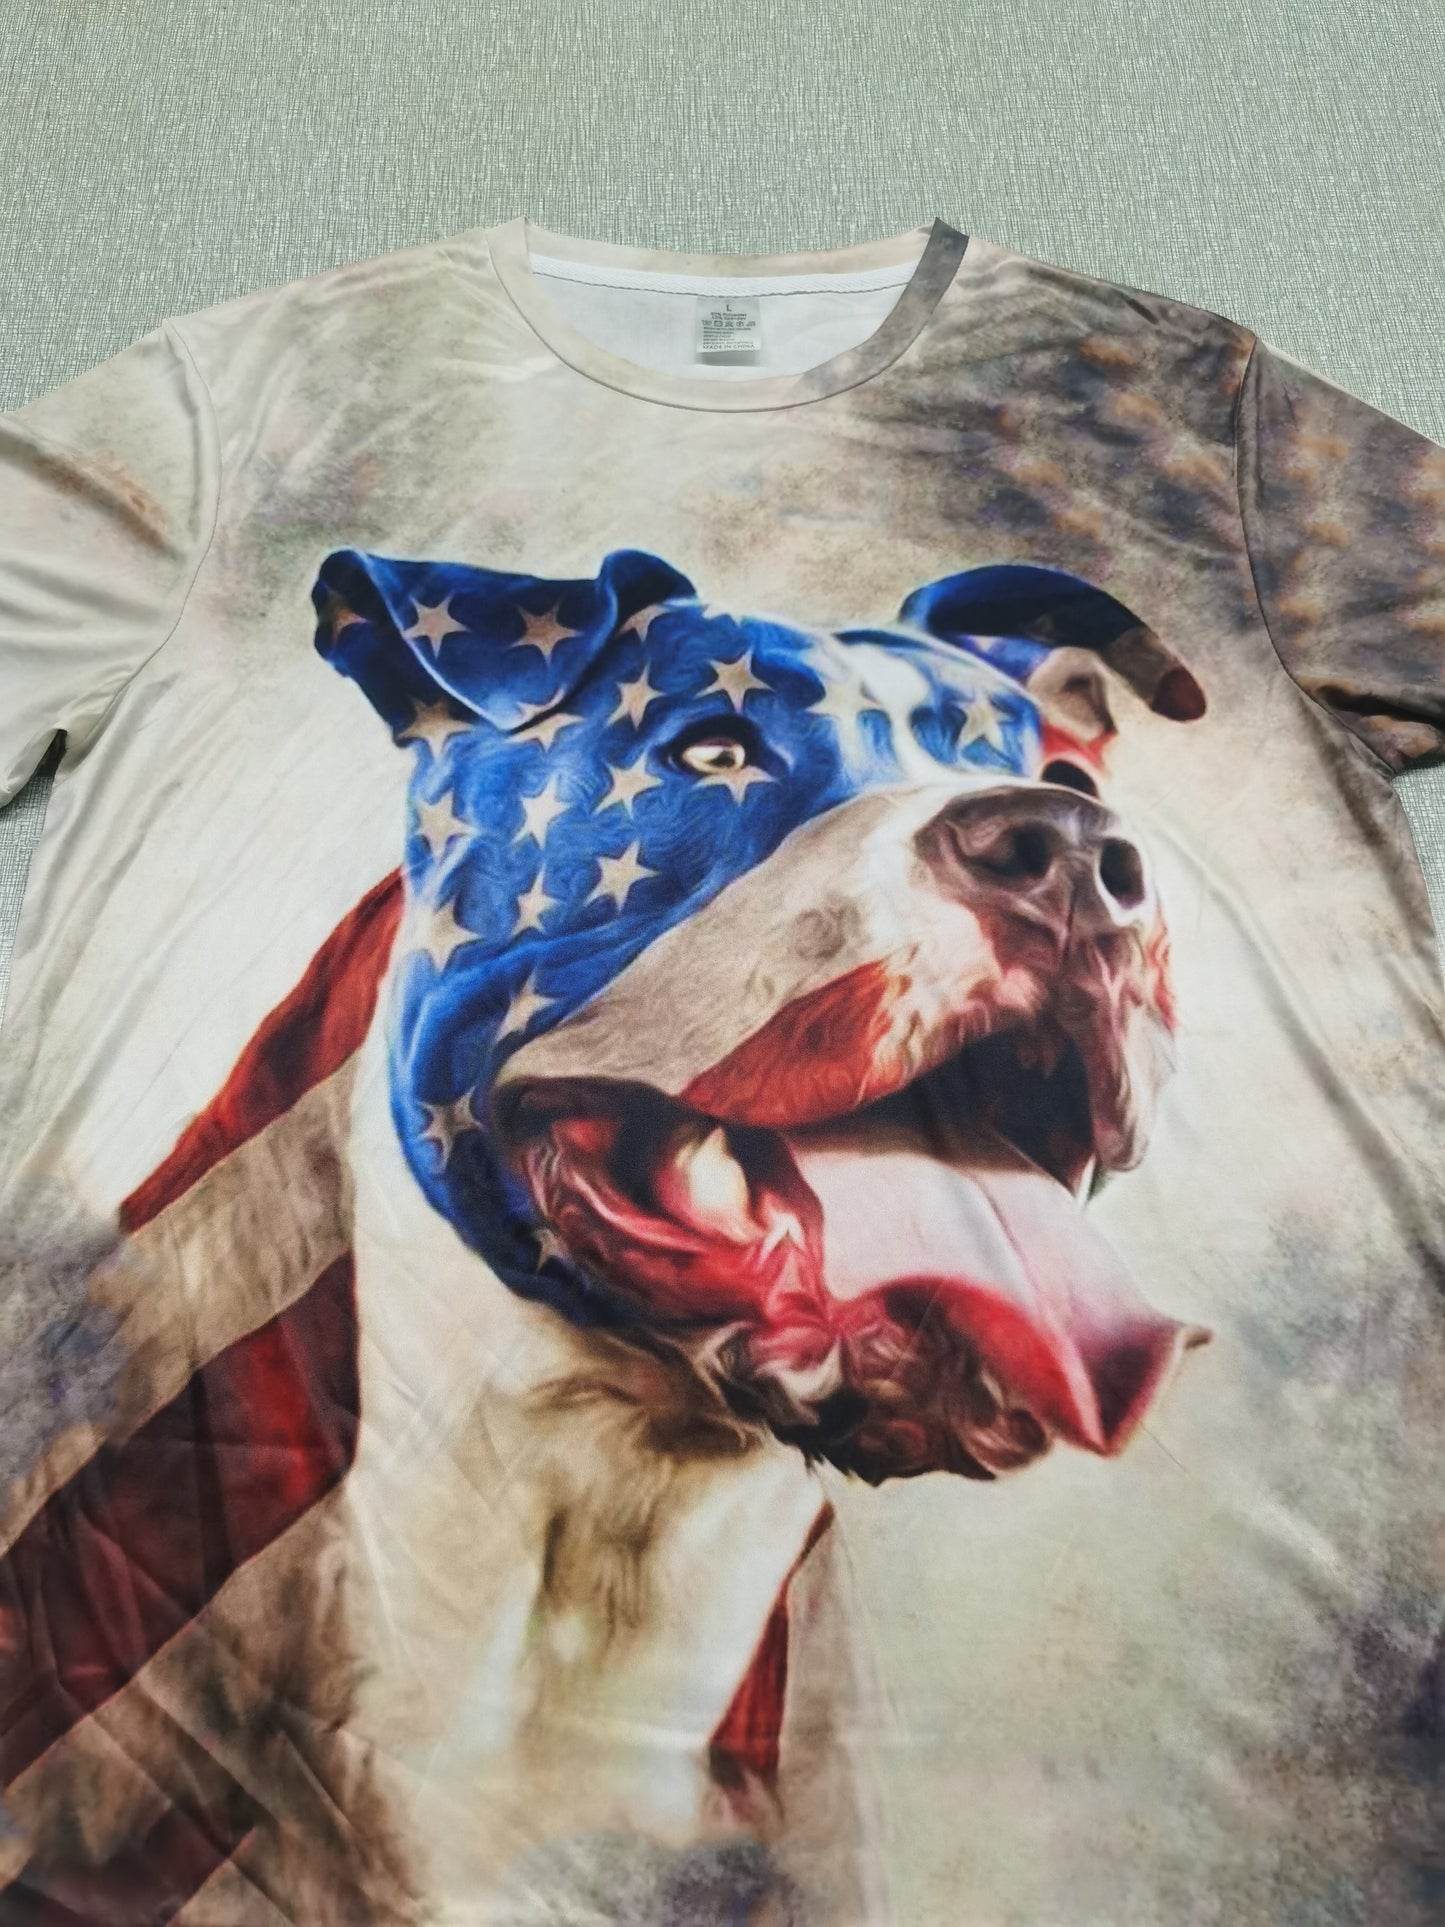 Dog And American Flag Theme, Men's Novelty T-shirt, Trendy Vintage Tees For Summer